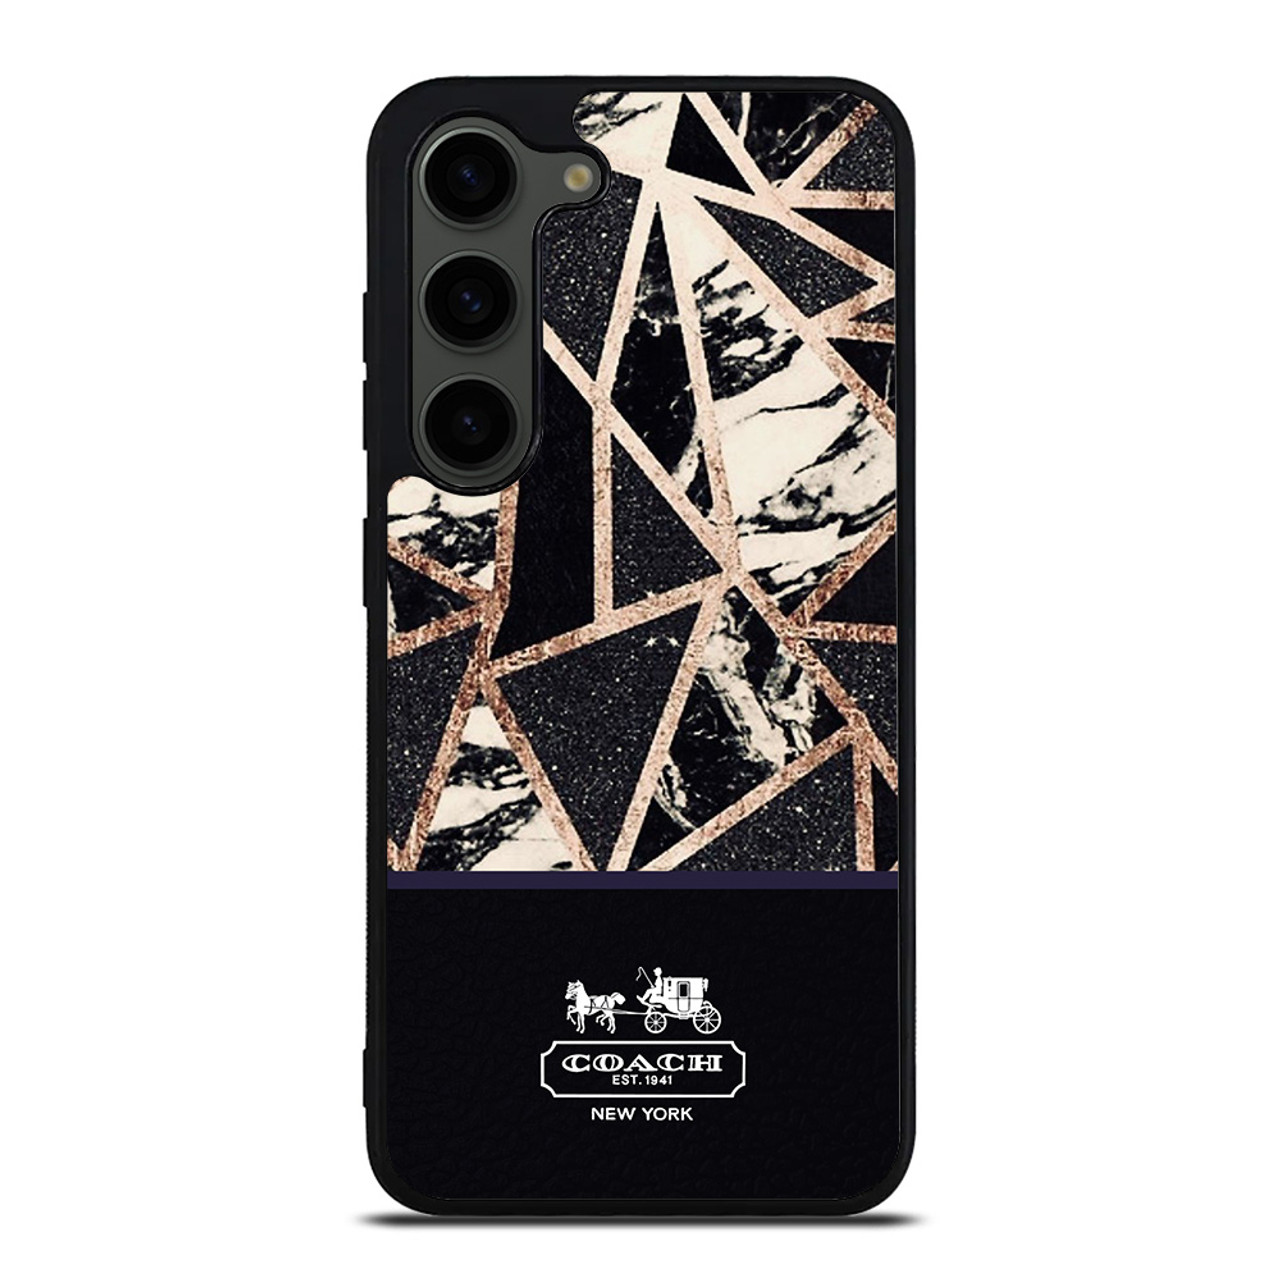 LOUIS VUITTON PATTERN BLACK AND WHITE Samsung Galaxy S23 Plus Case Cover